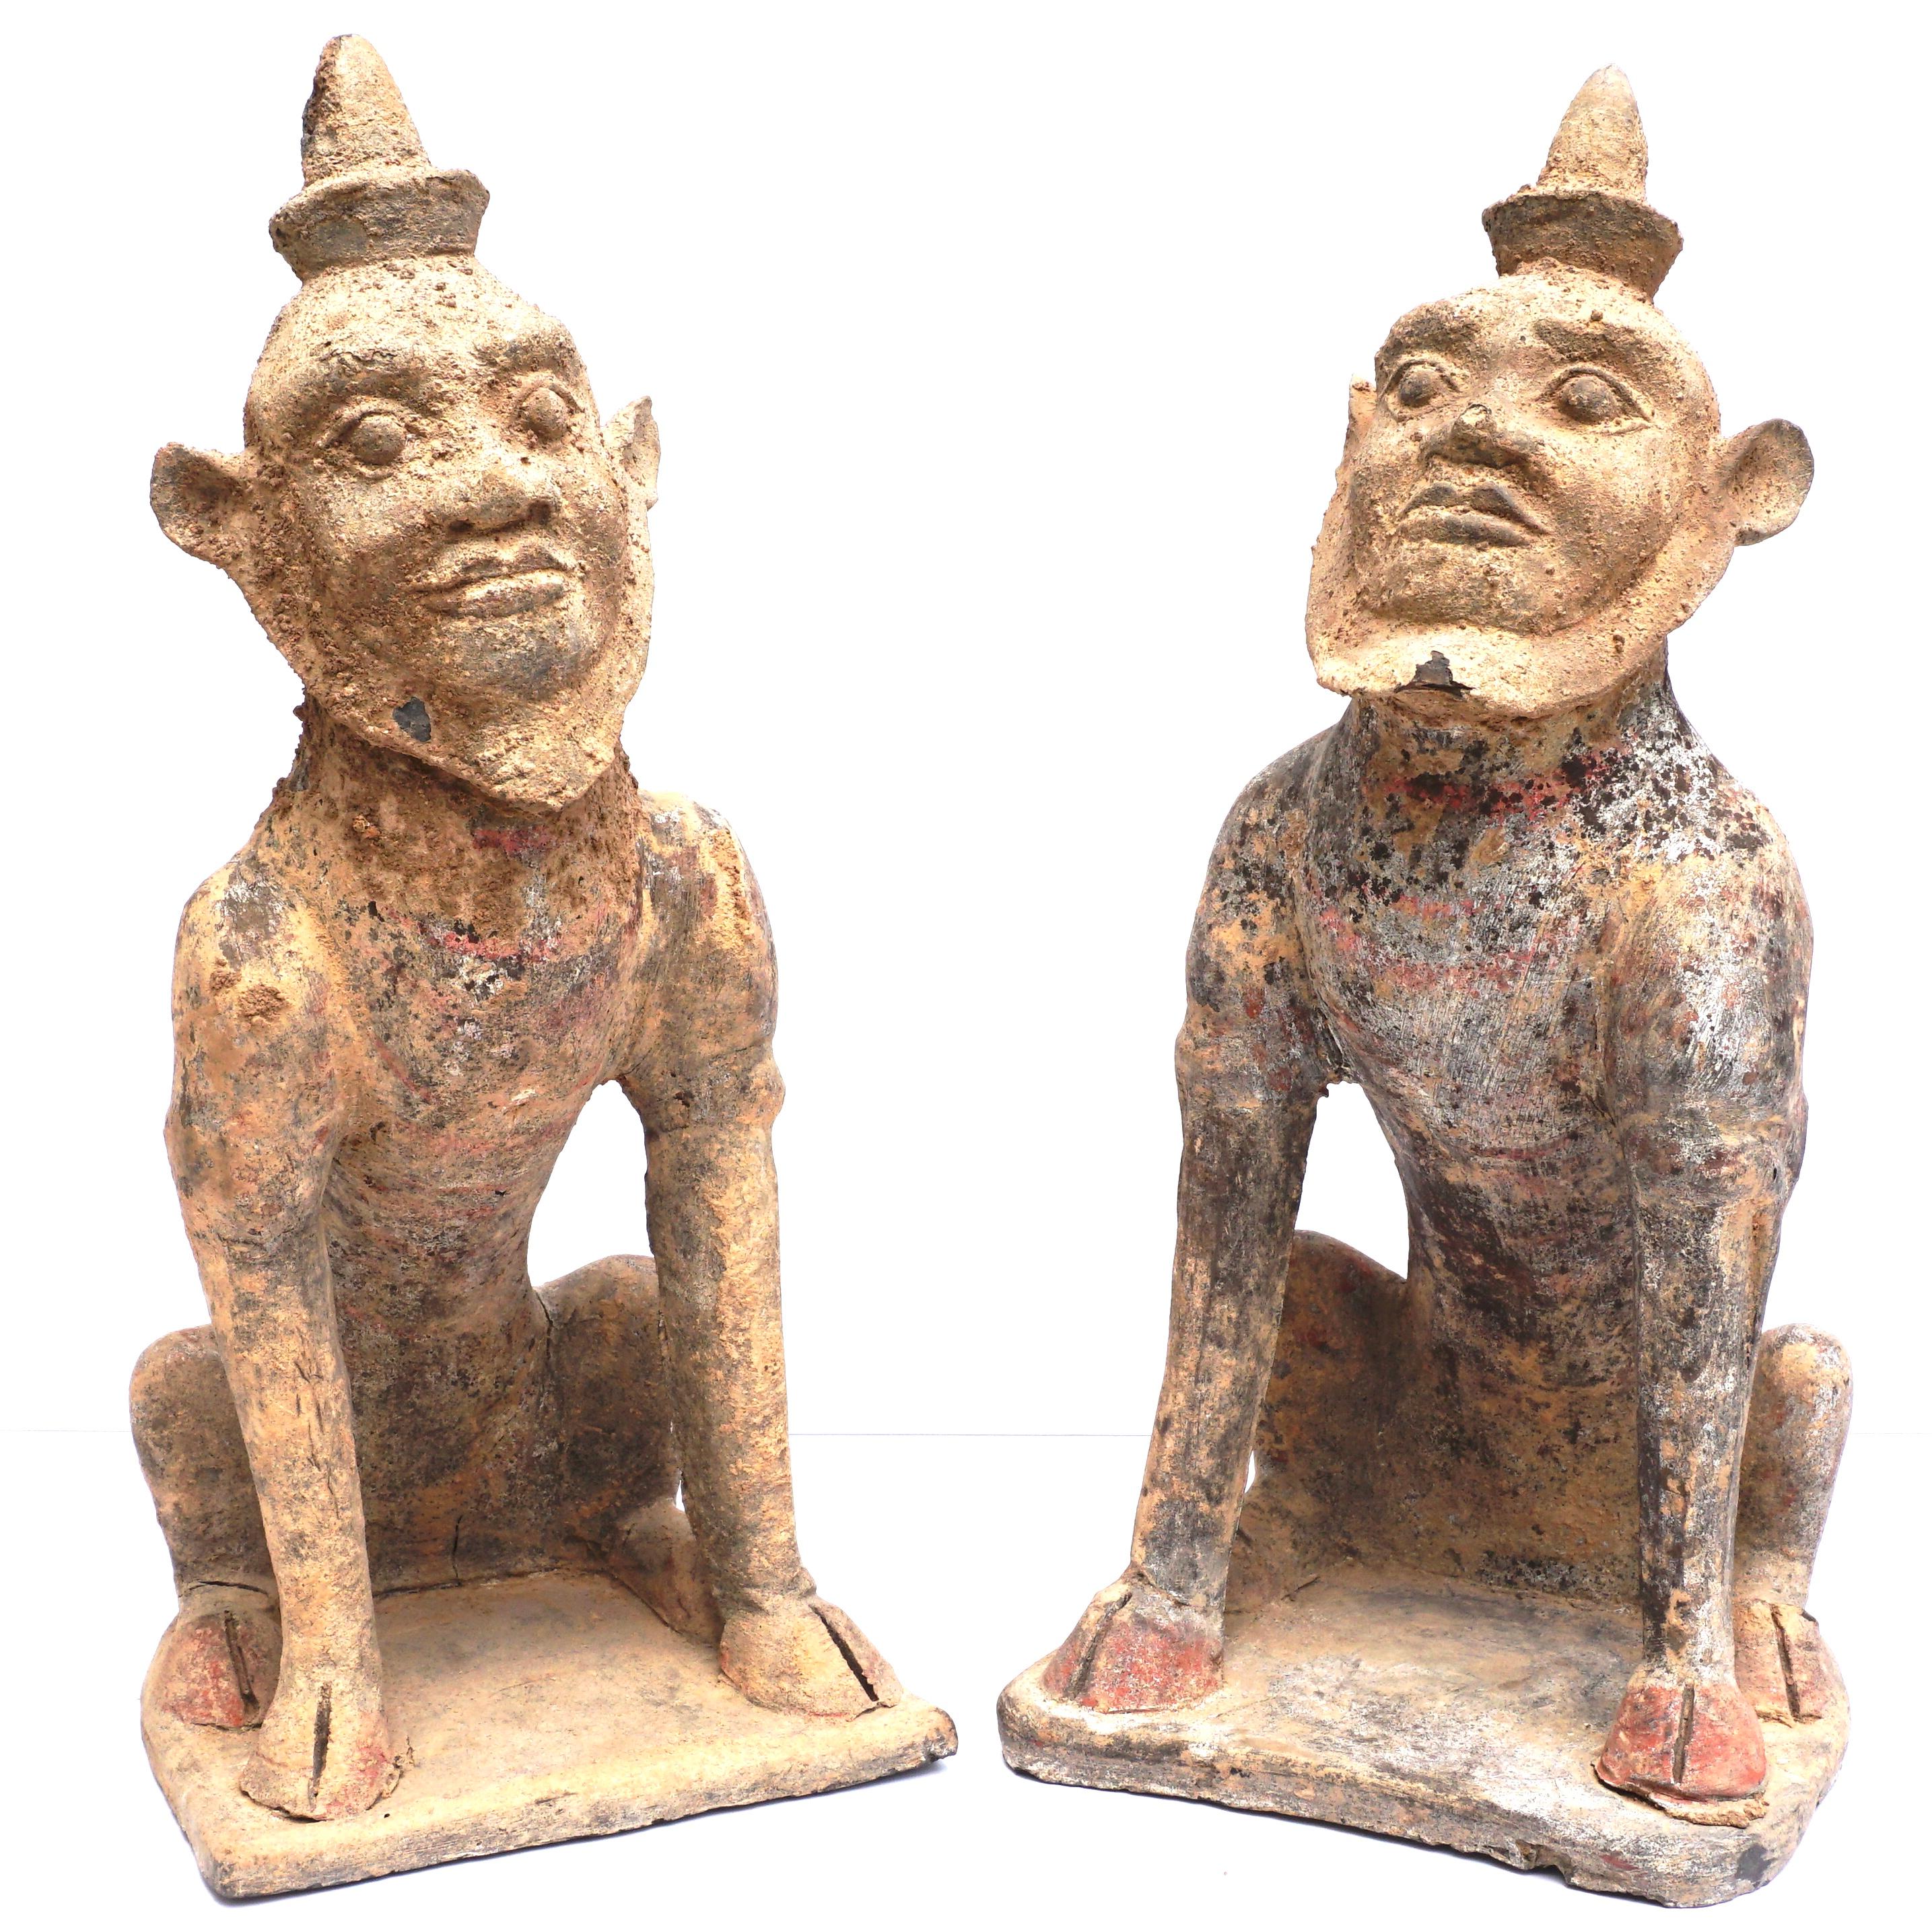 Chinese, Tang Dynasty (618 AD to 906 AD) TL tested
A pair of semi-human earth spirit figures seated on their haunches with cloven hooves planted firmly on the base. Both wearing conical mandarin style hats, their bearded face peering upward with a